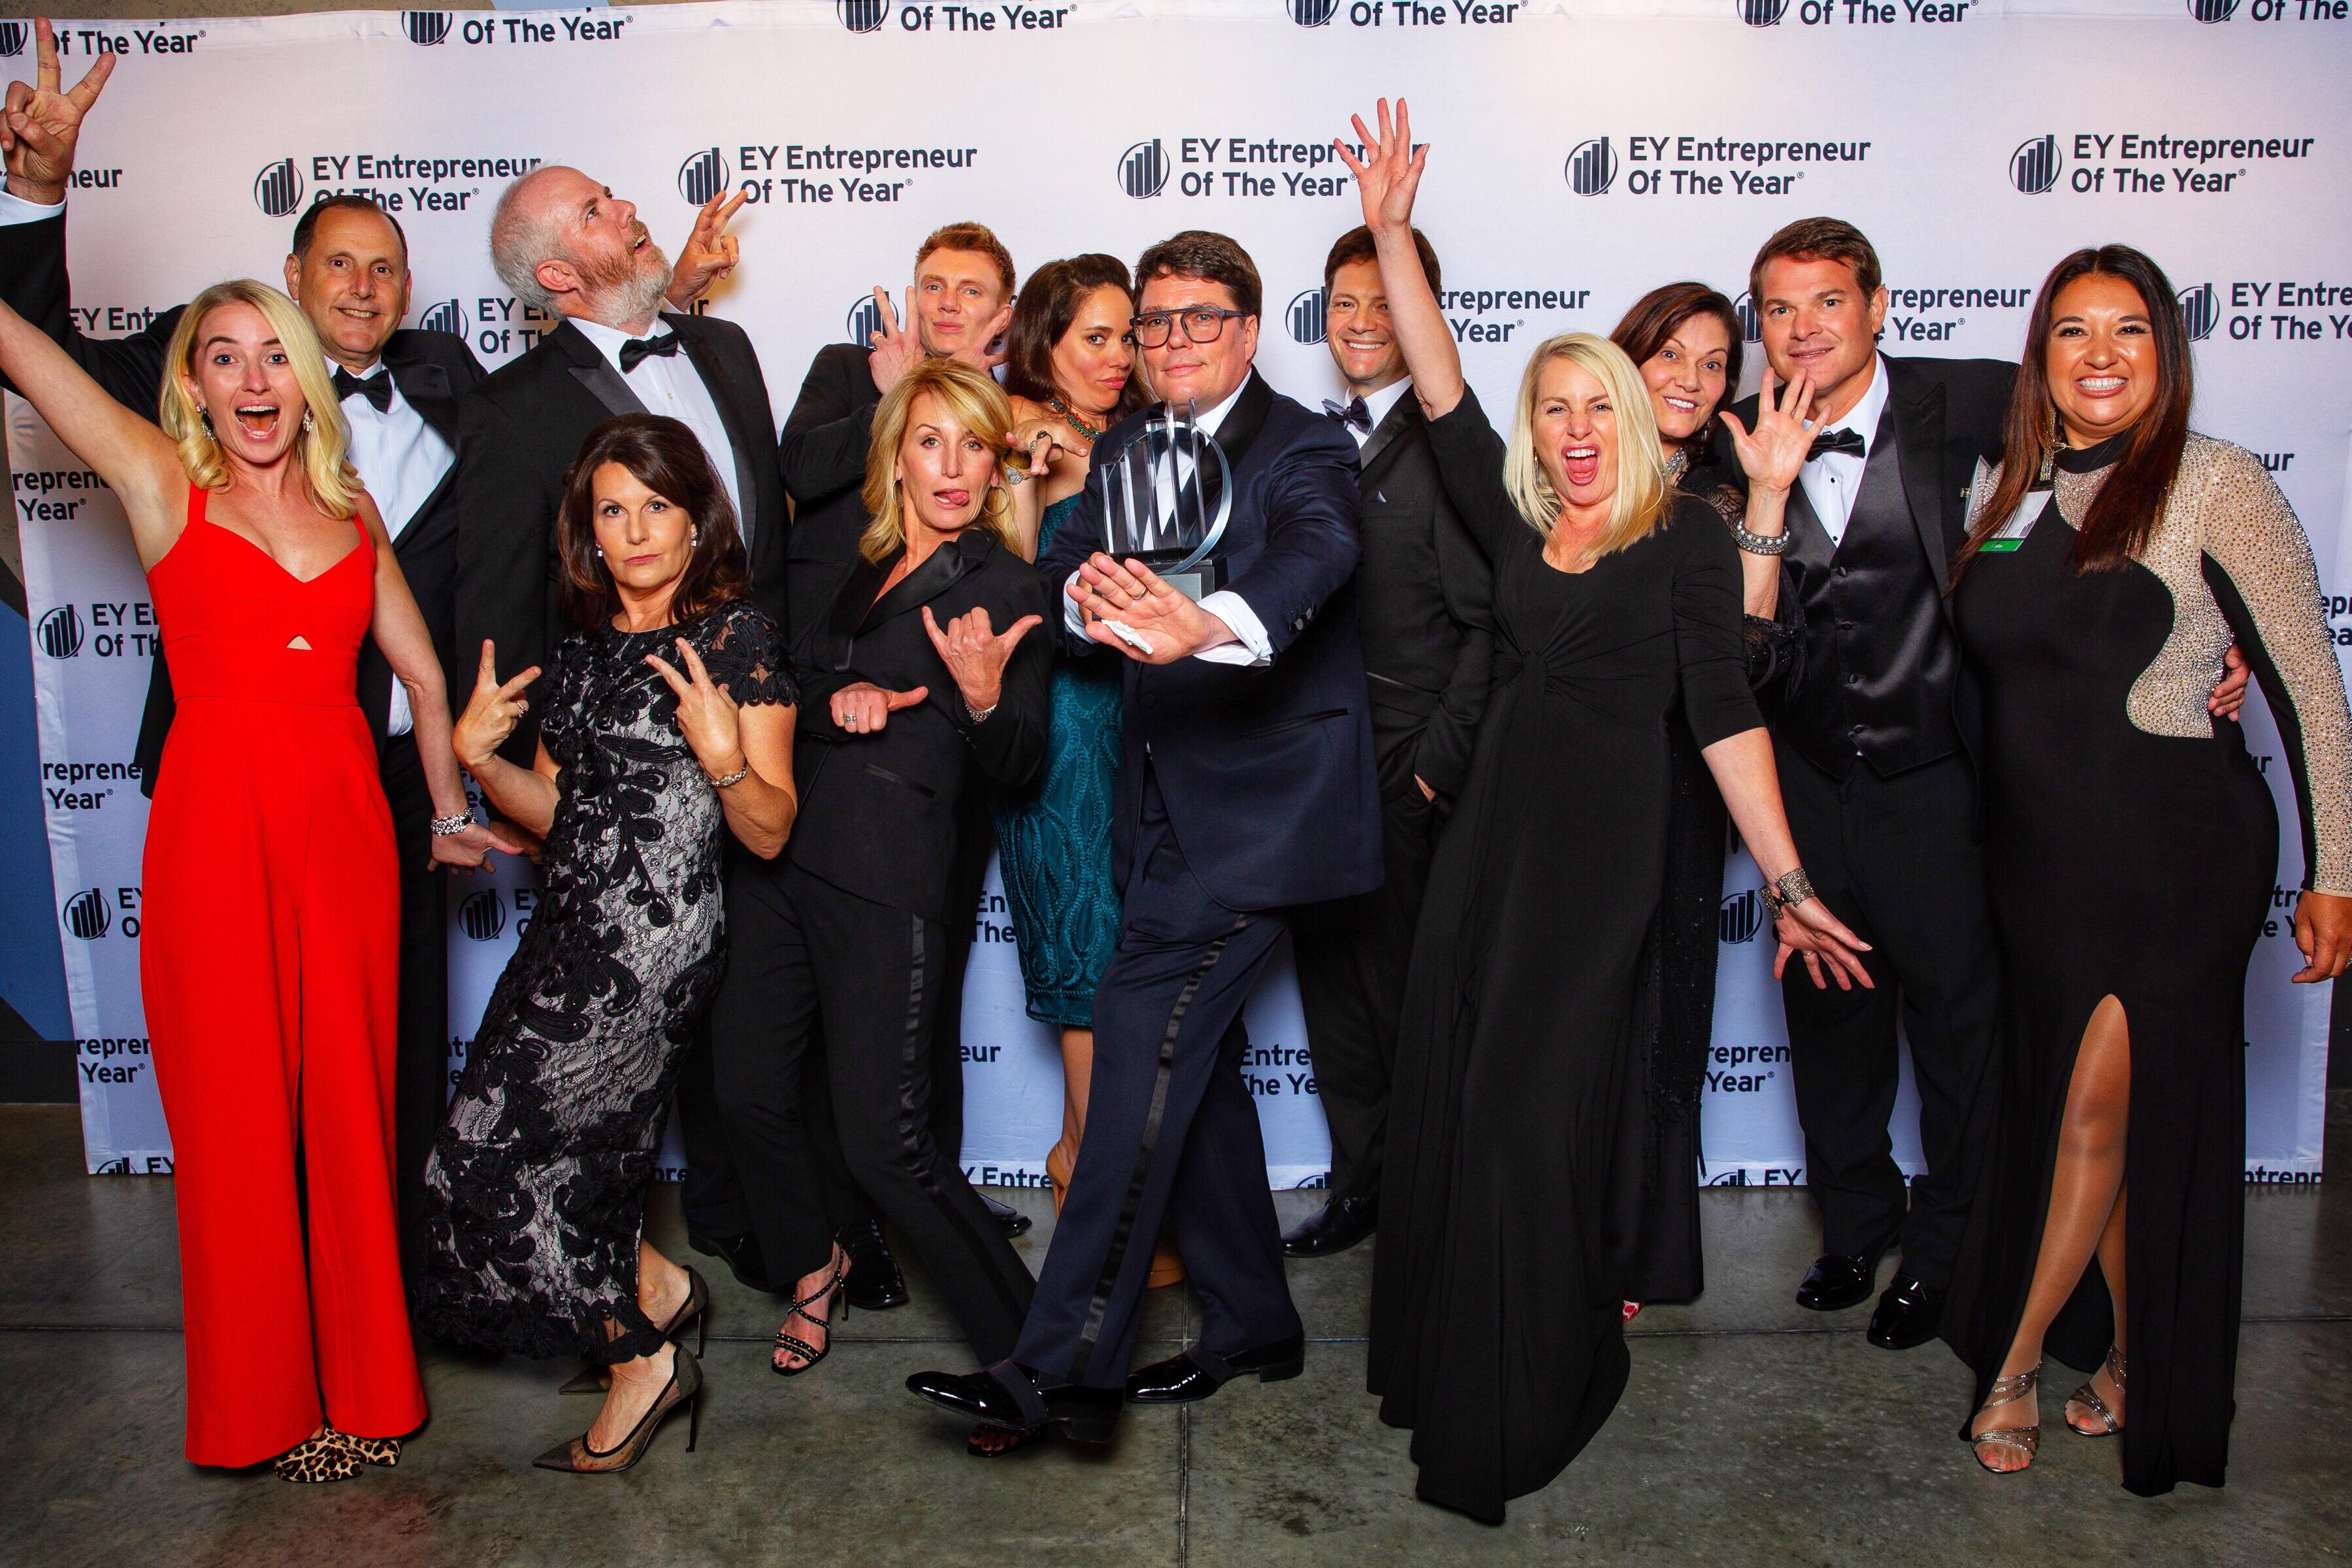 EY Entrepreneur of the Year A milestone to celebrate together Sharecare